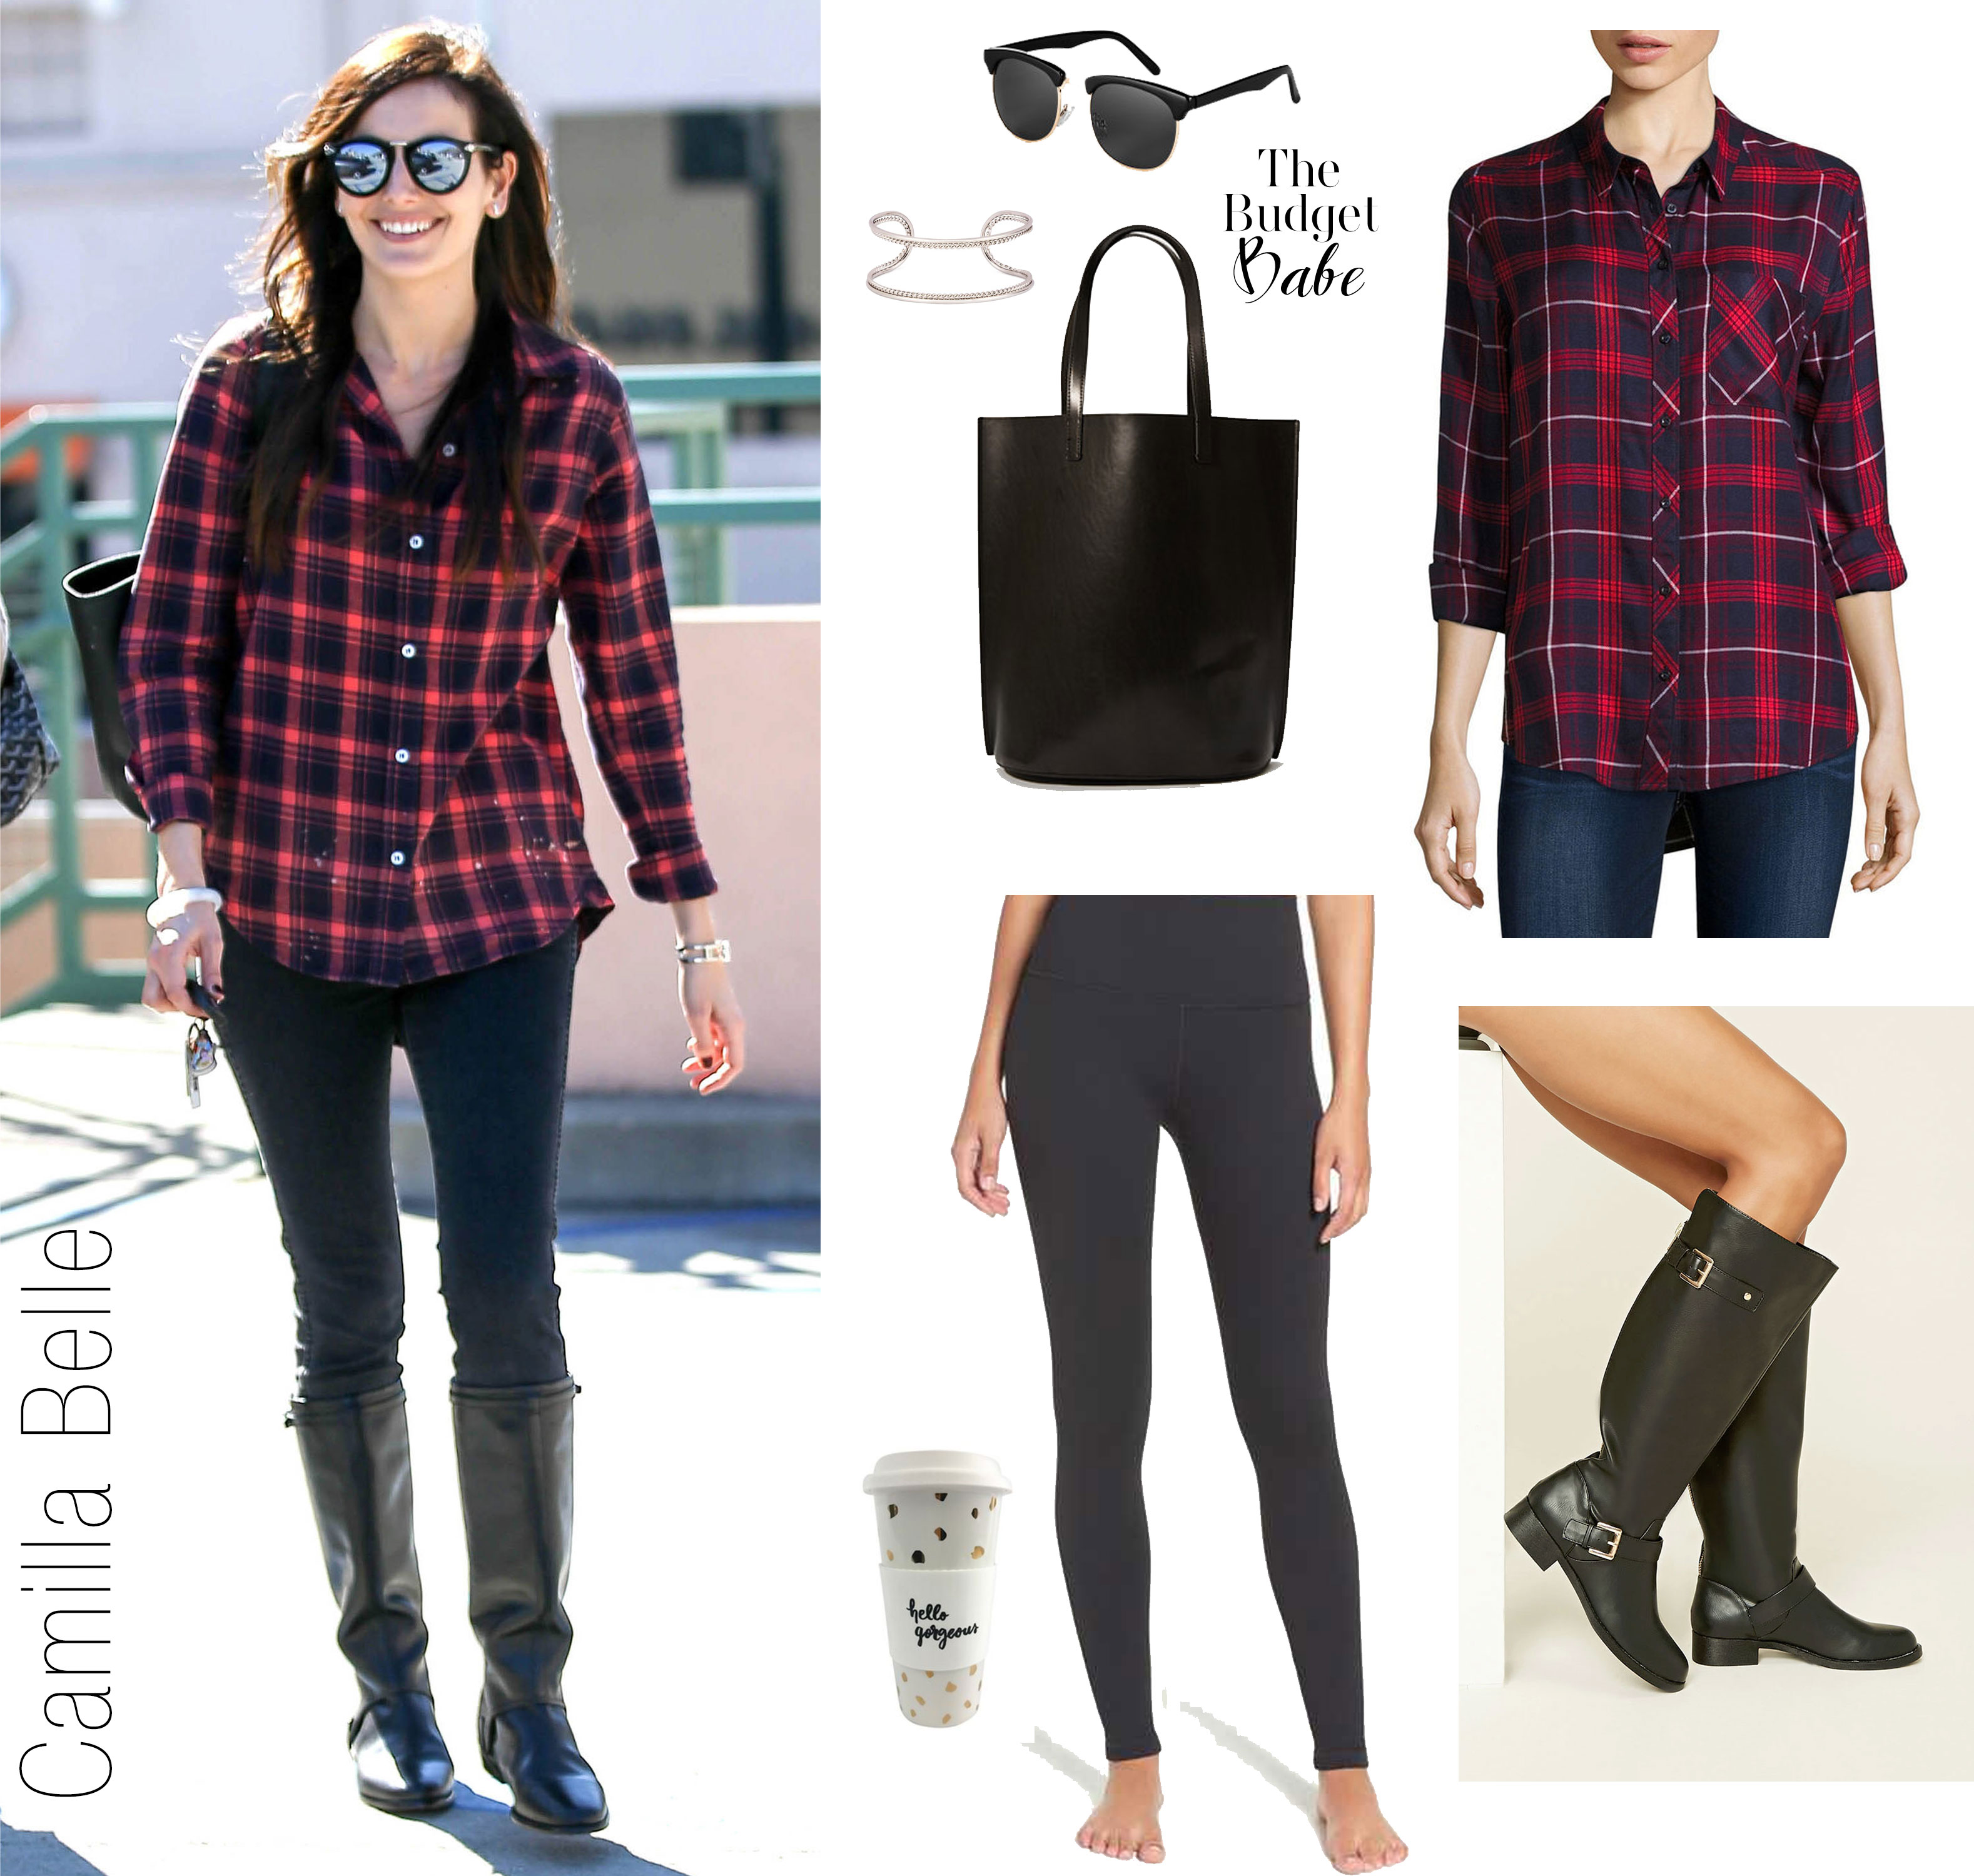 Camilla Belle looks casual and chic in a plaid shirt with black leggings and black riding boots.